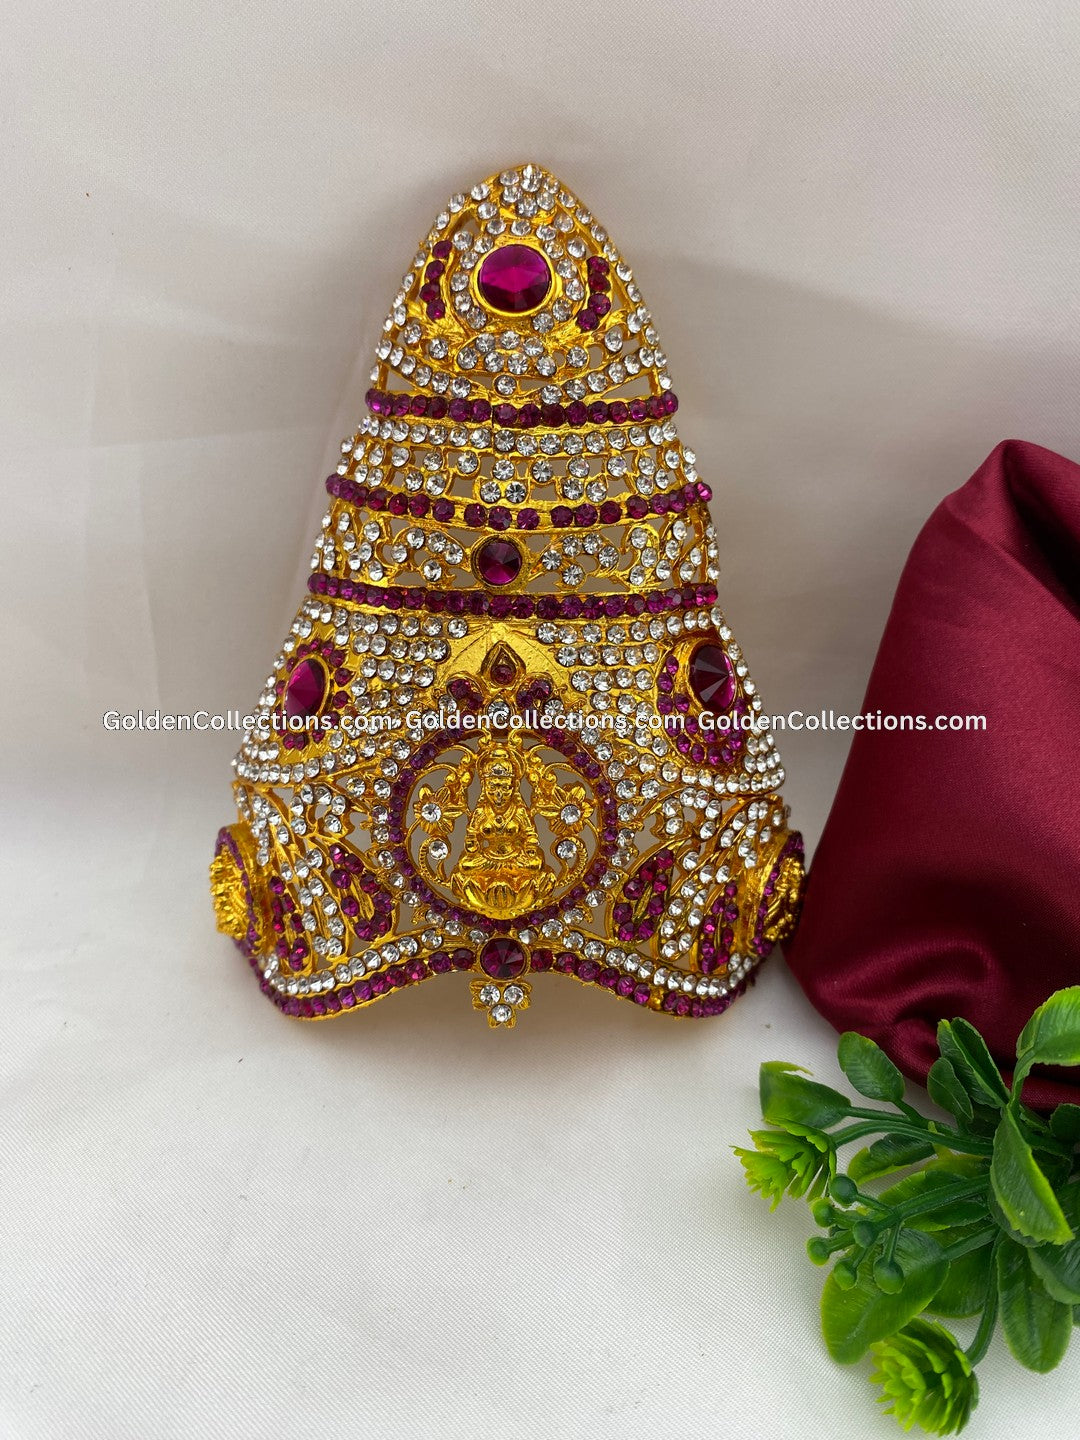 Hindu Deity Crown with Intricate Design - GoldenCollections DGC-069